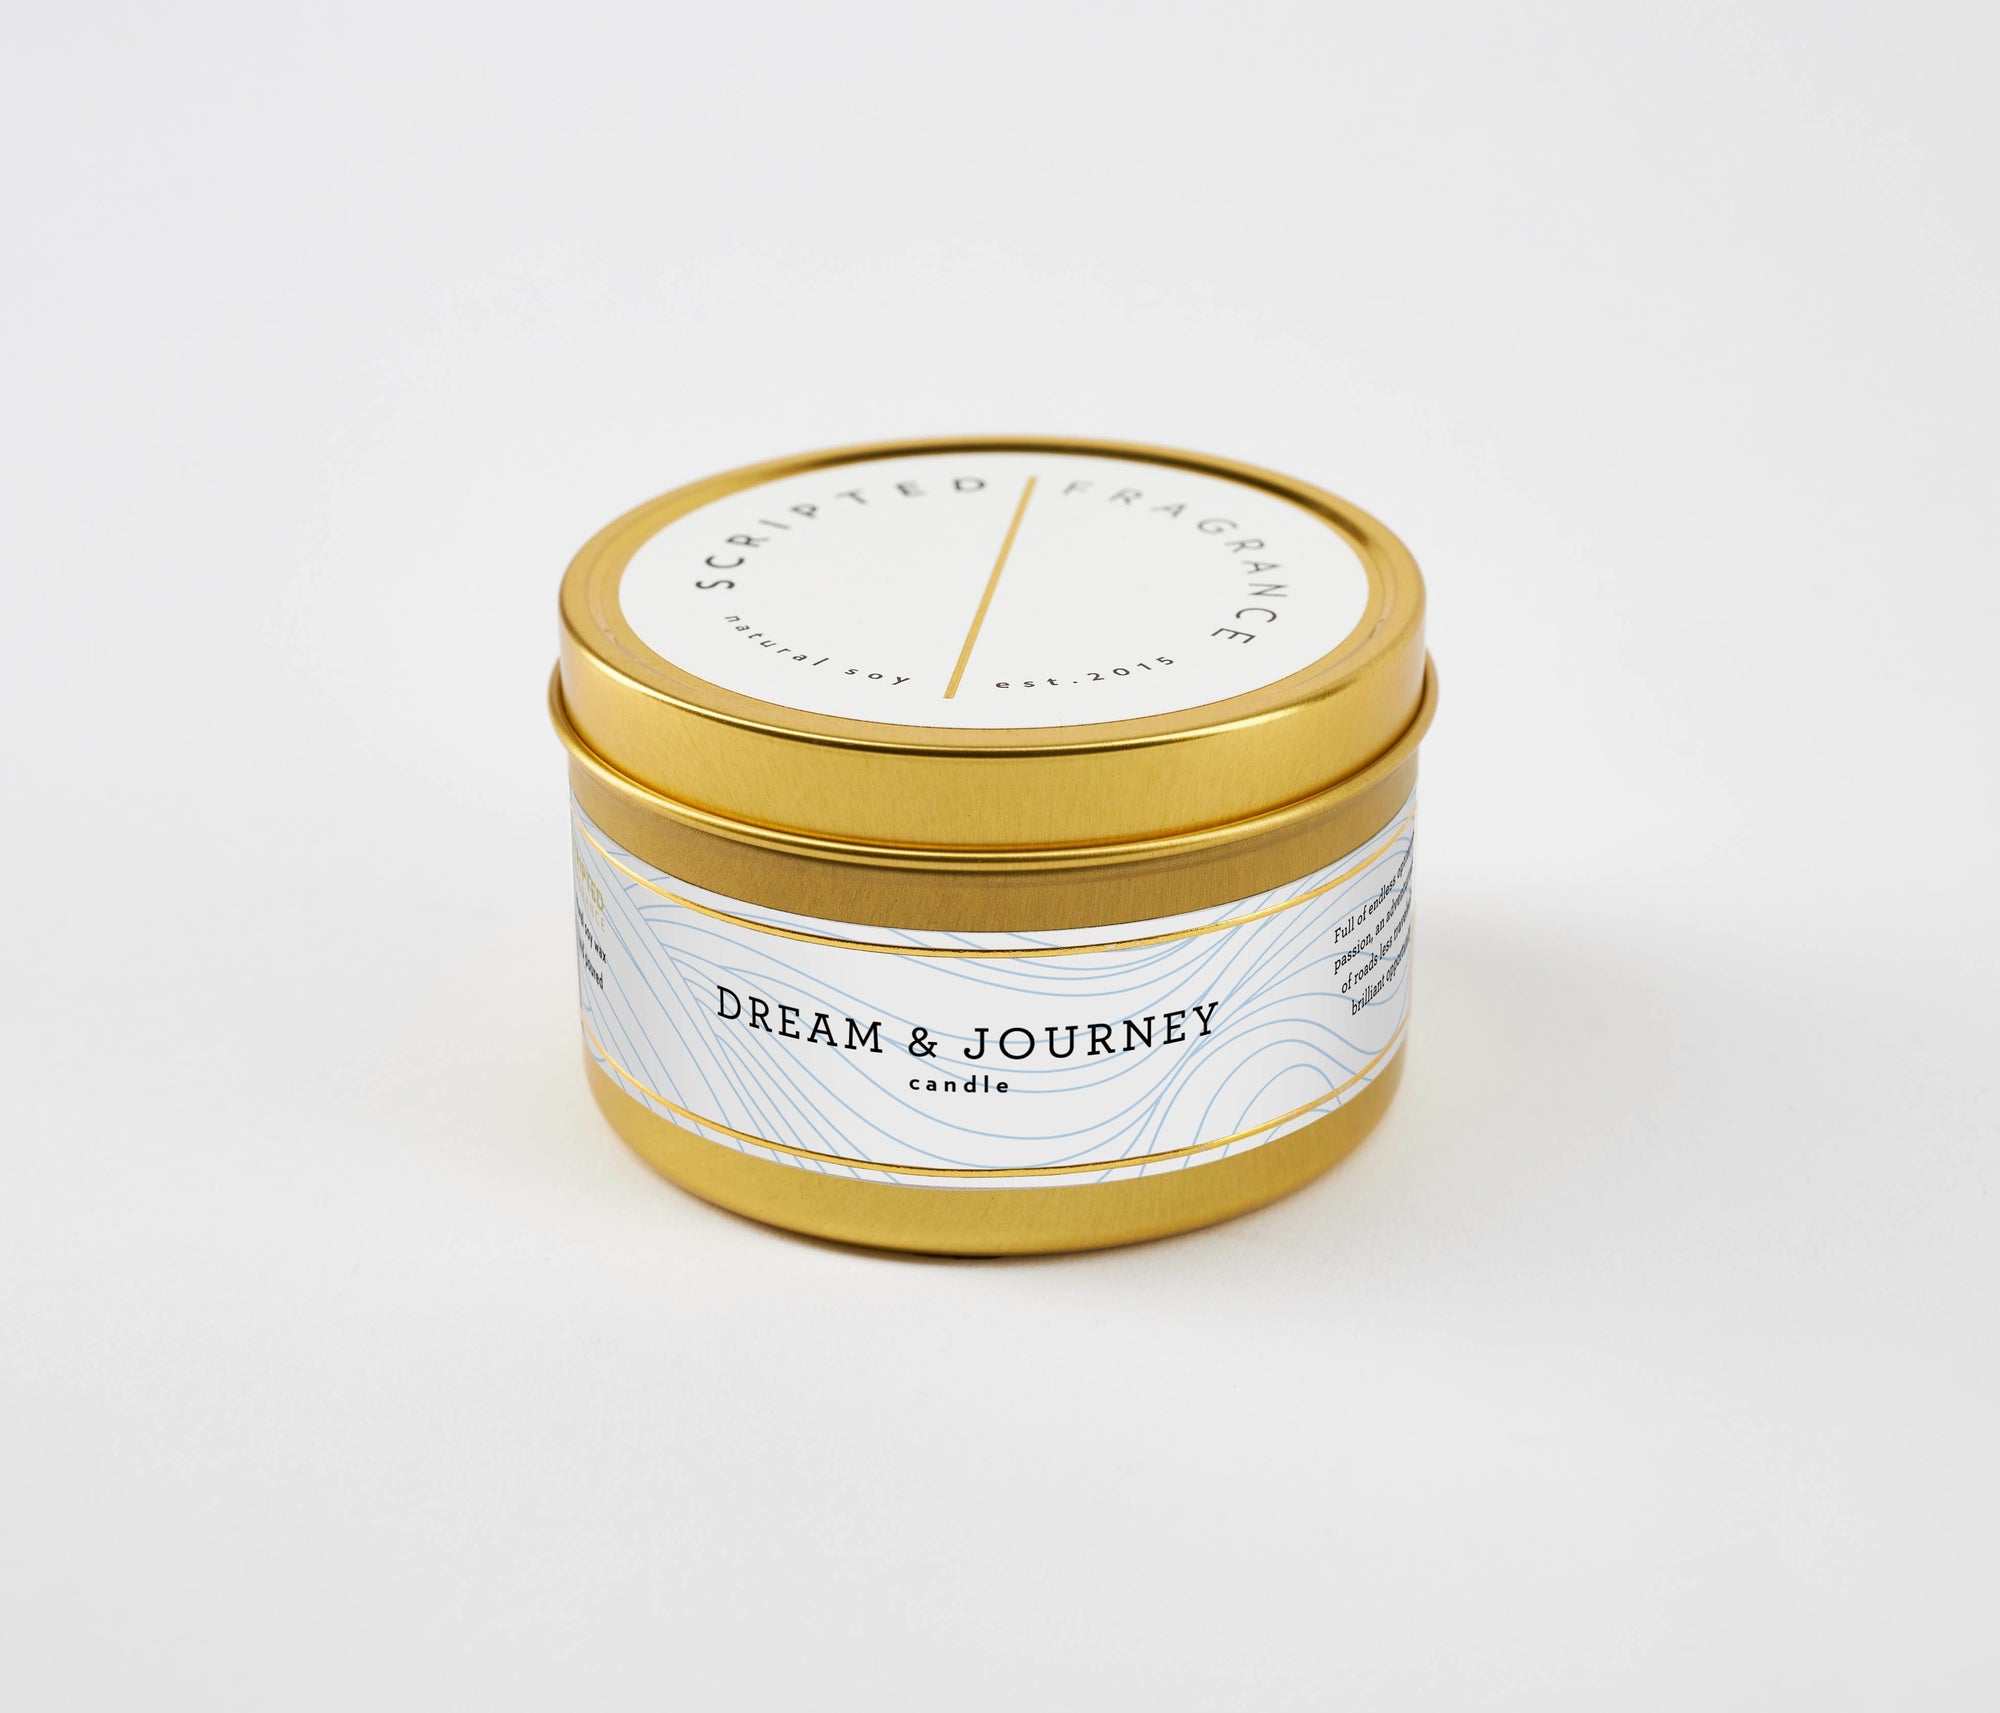 Dream & Journey Soy Candle